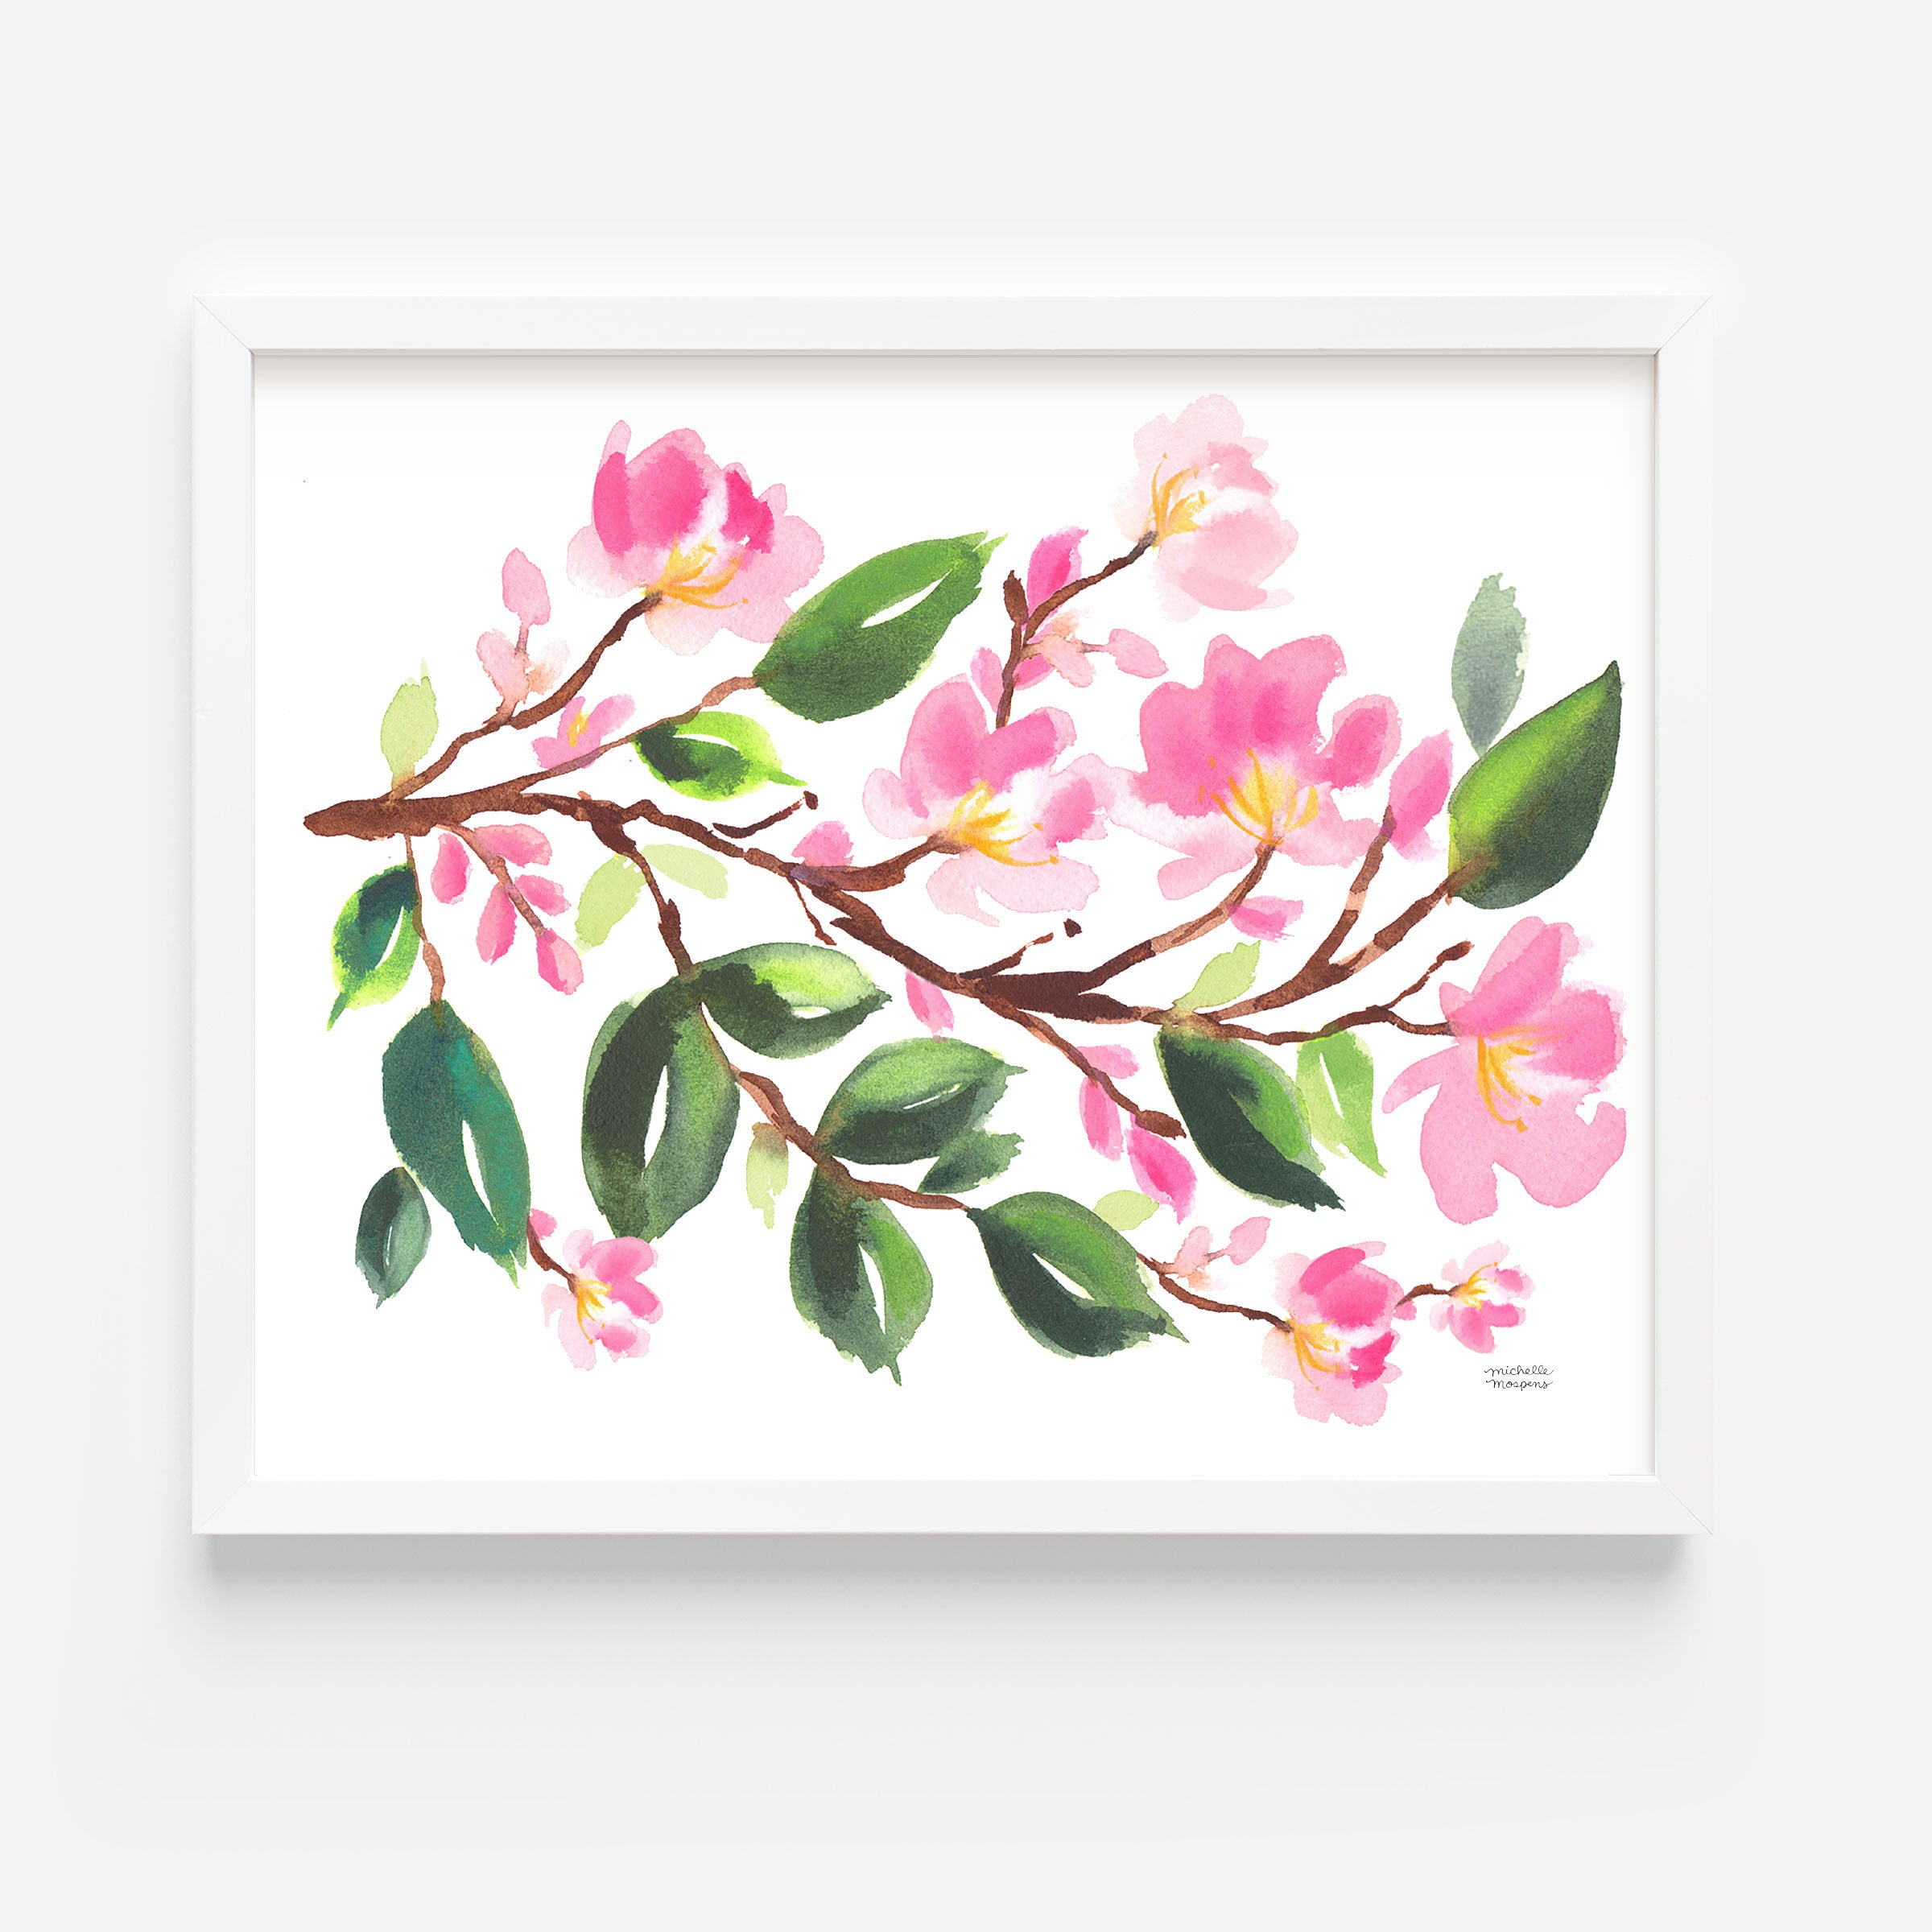 Watercolor Cherry Blossom Wall Art Print by Michelle Mospens